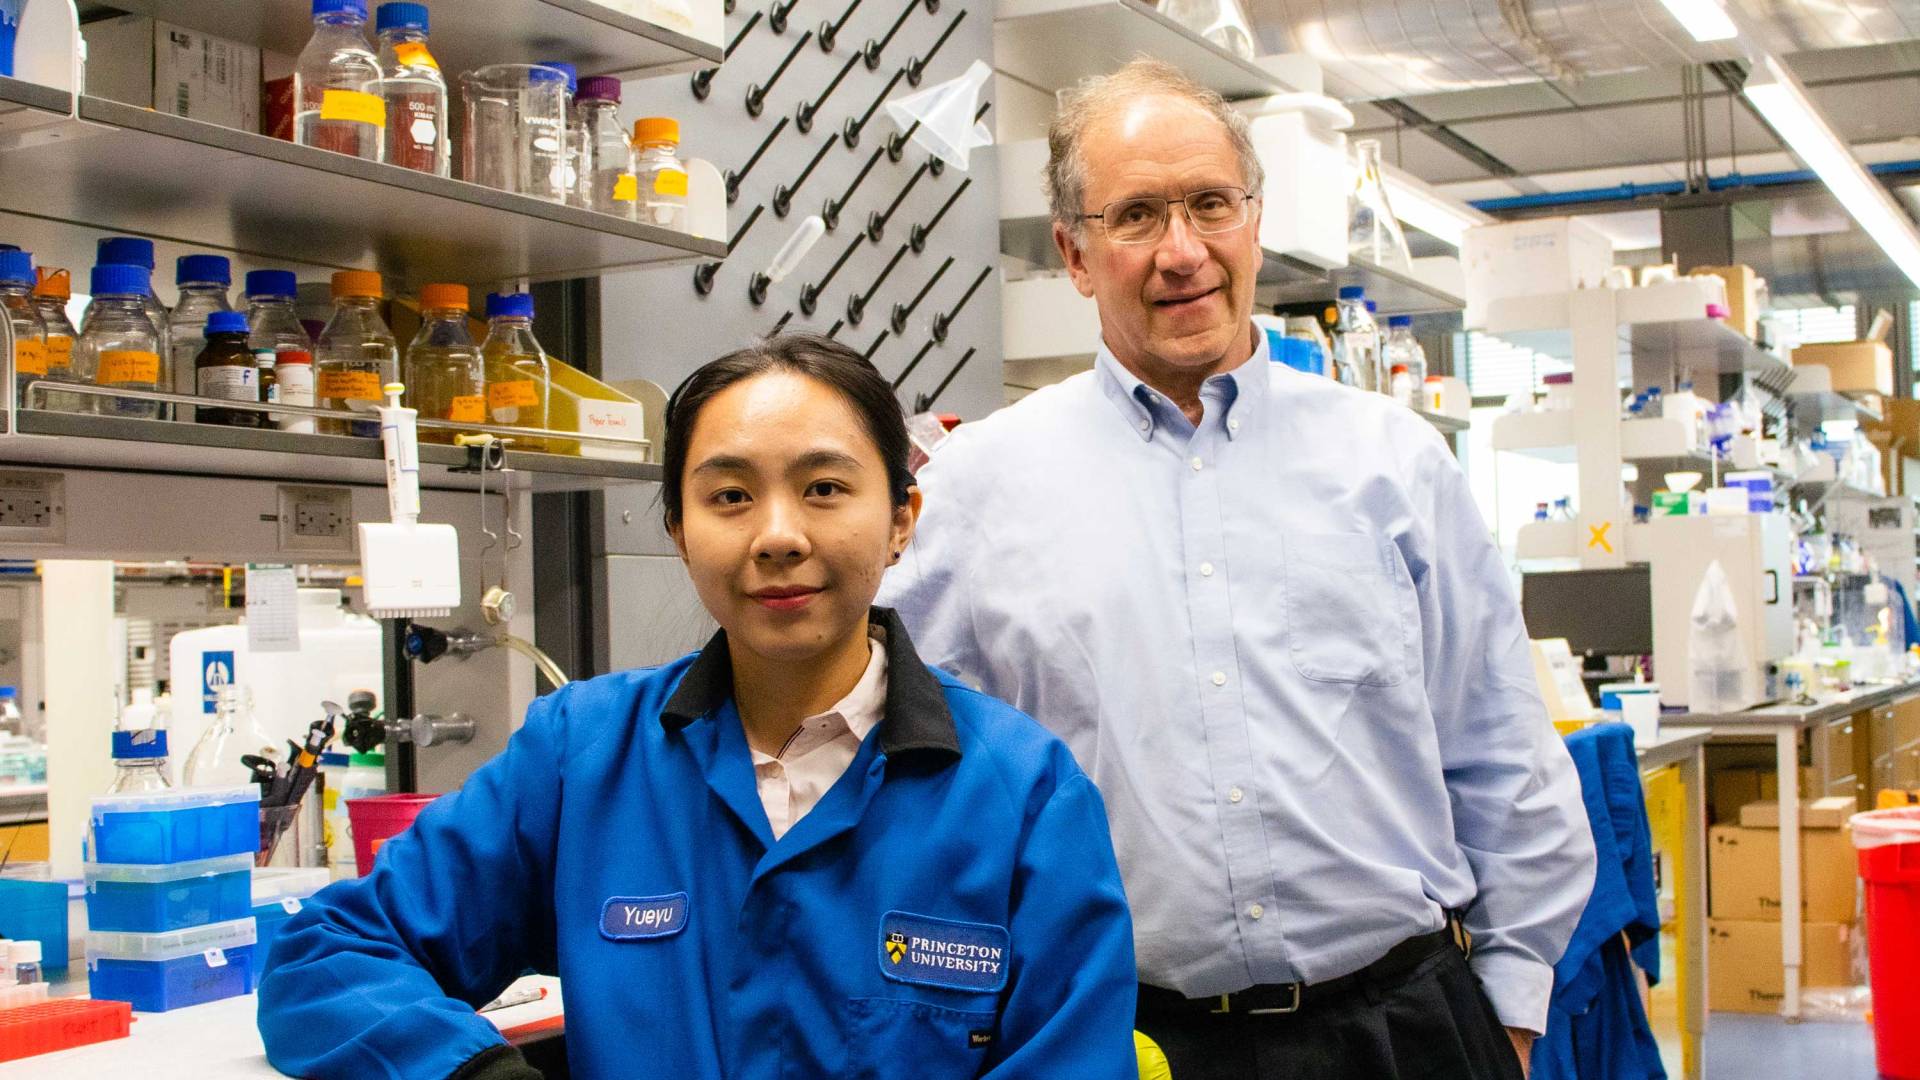 Michael Hecht and colleague Yueyu Yao in Frick Laboratory